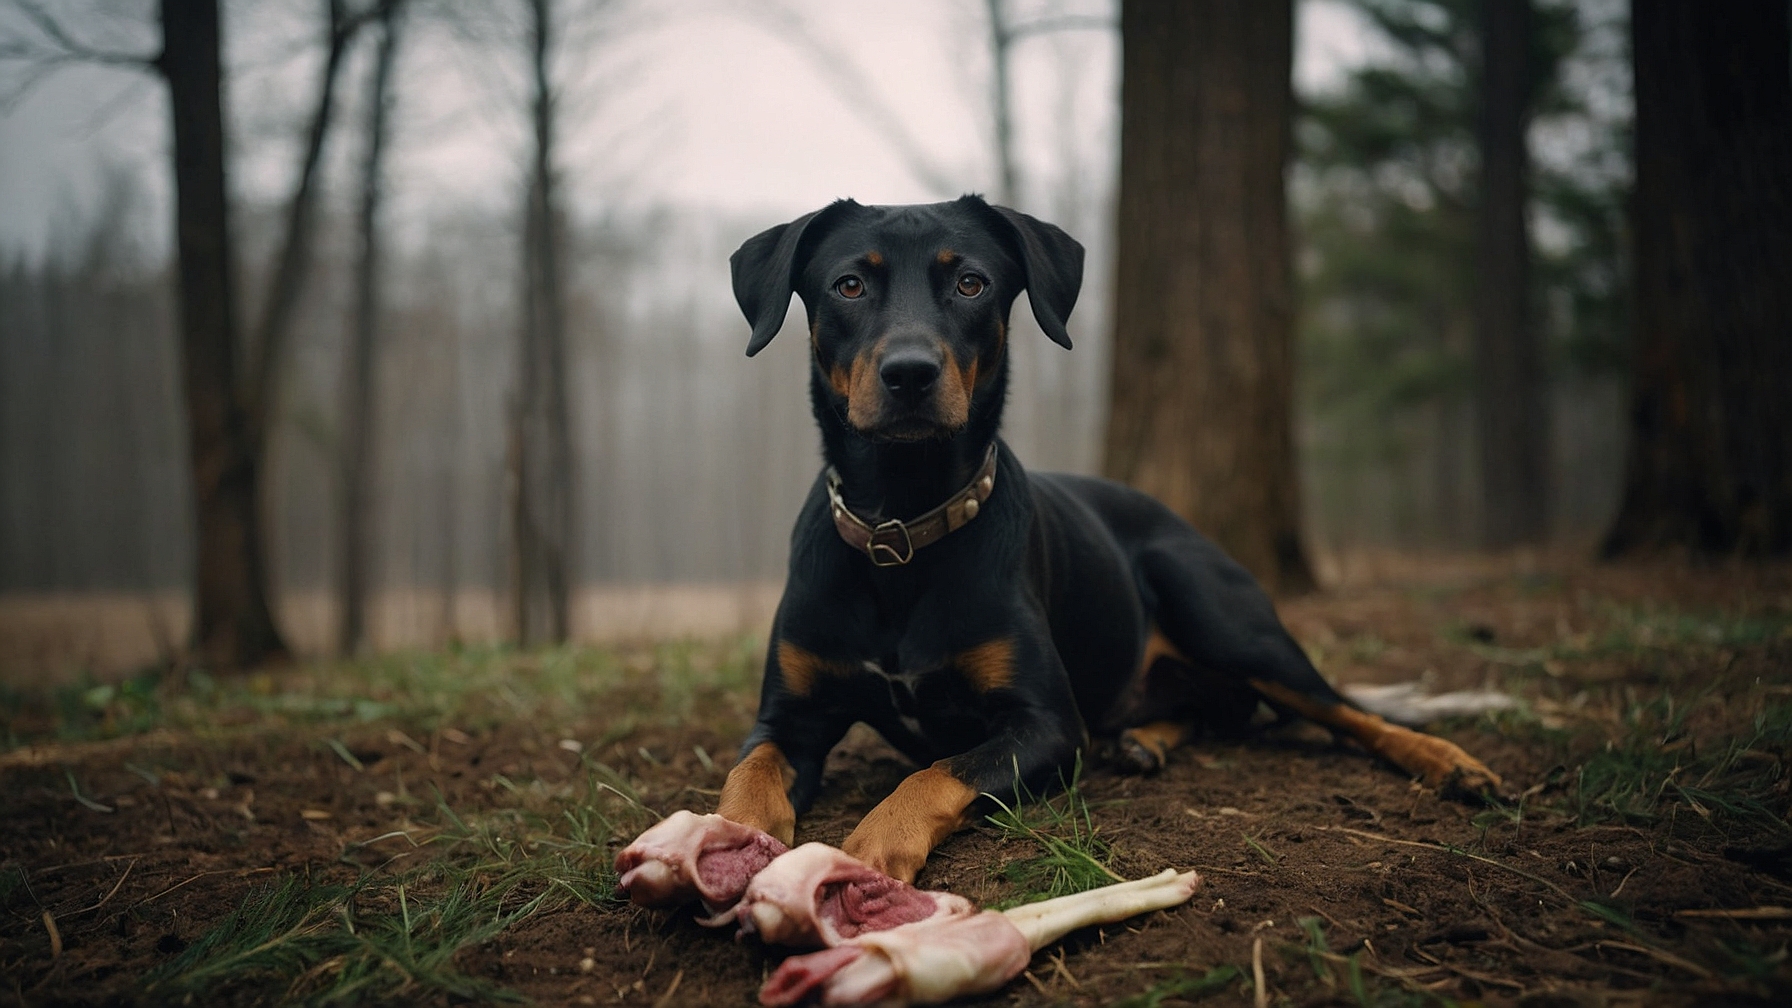 Can Dogs Eat Raw Deer Legs?